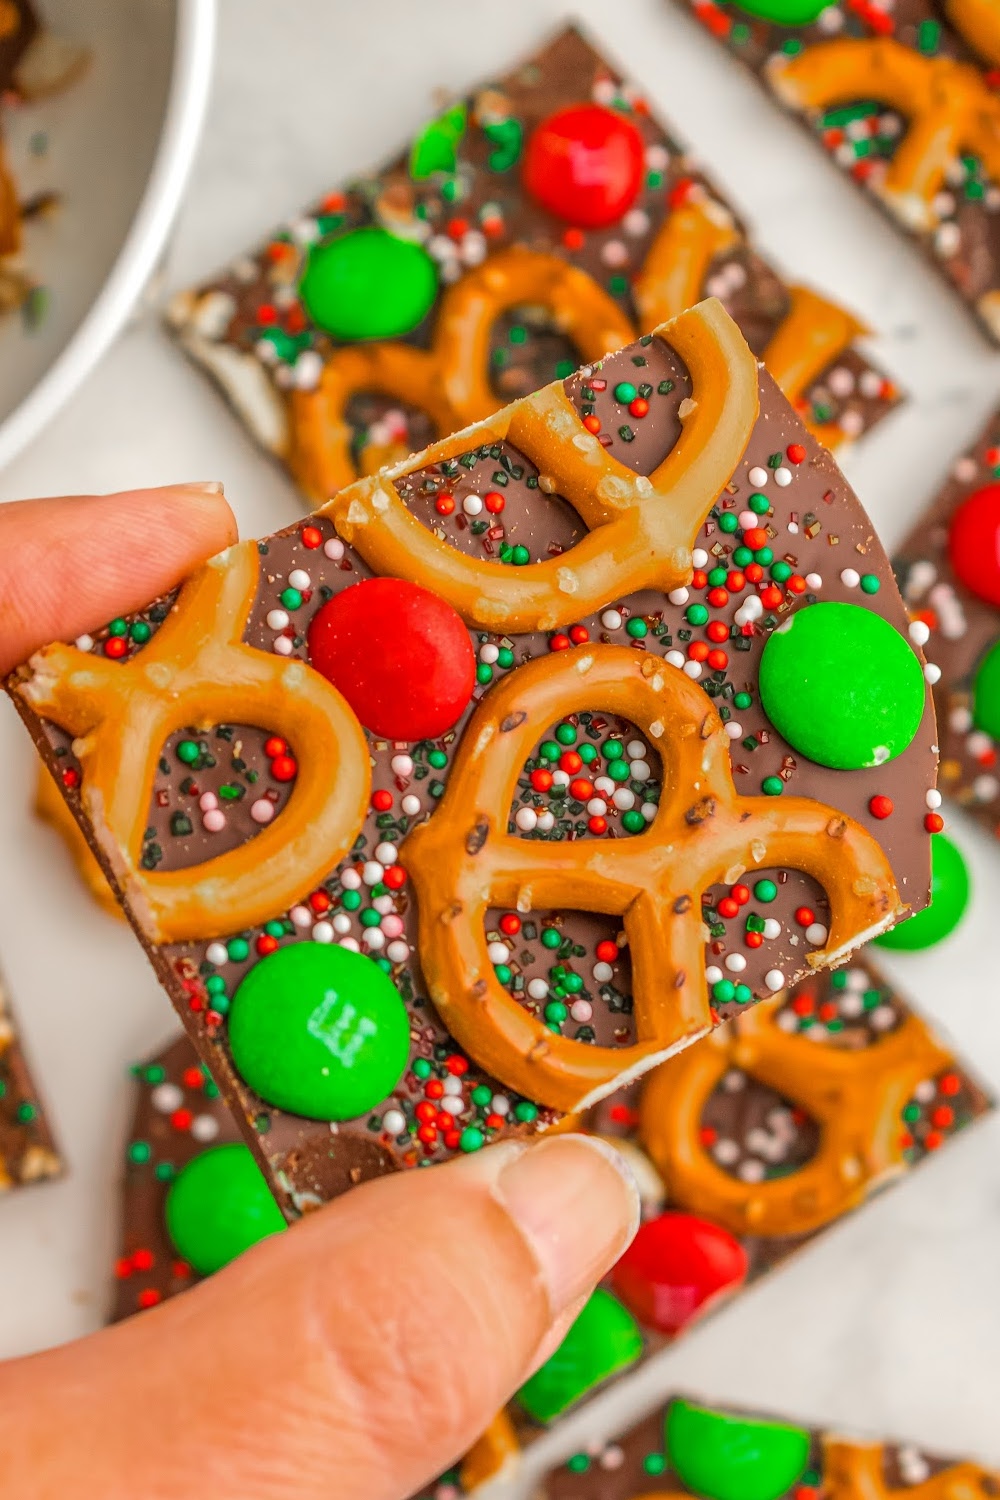 A woman's hand holding a piece of chocolate bark with mini pretzels, M&M candies, and red and green sprinkles.